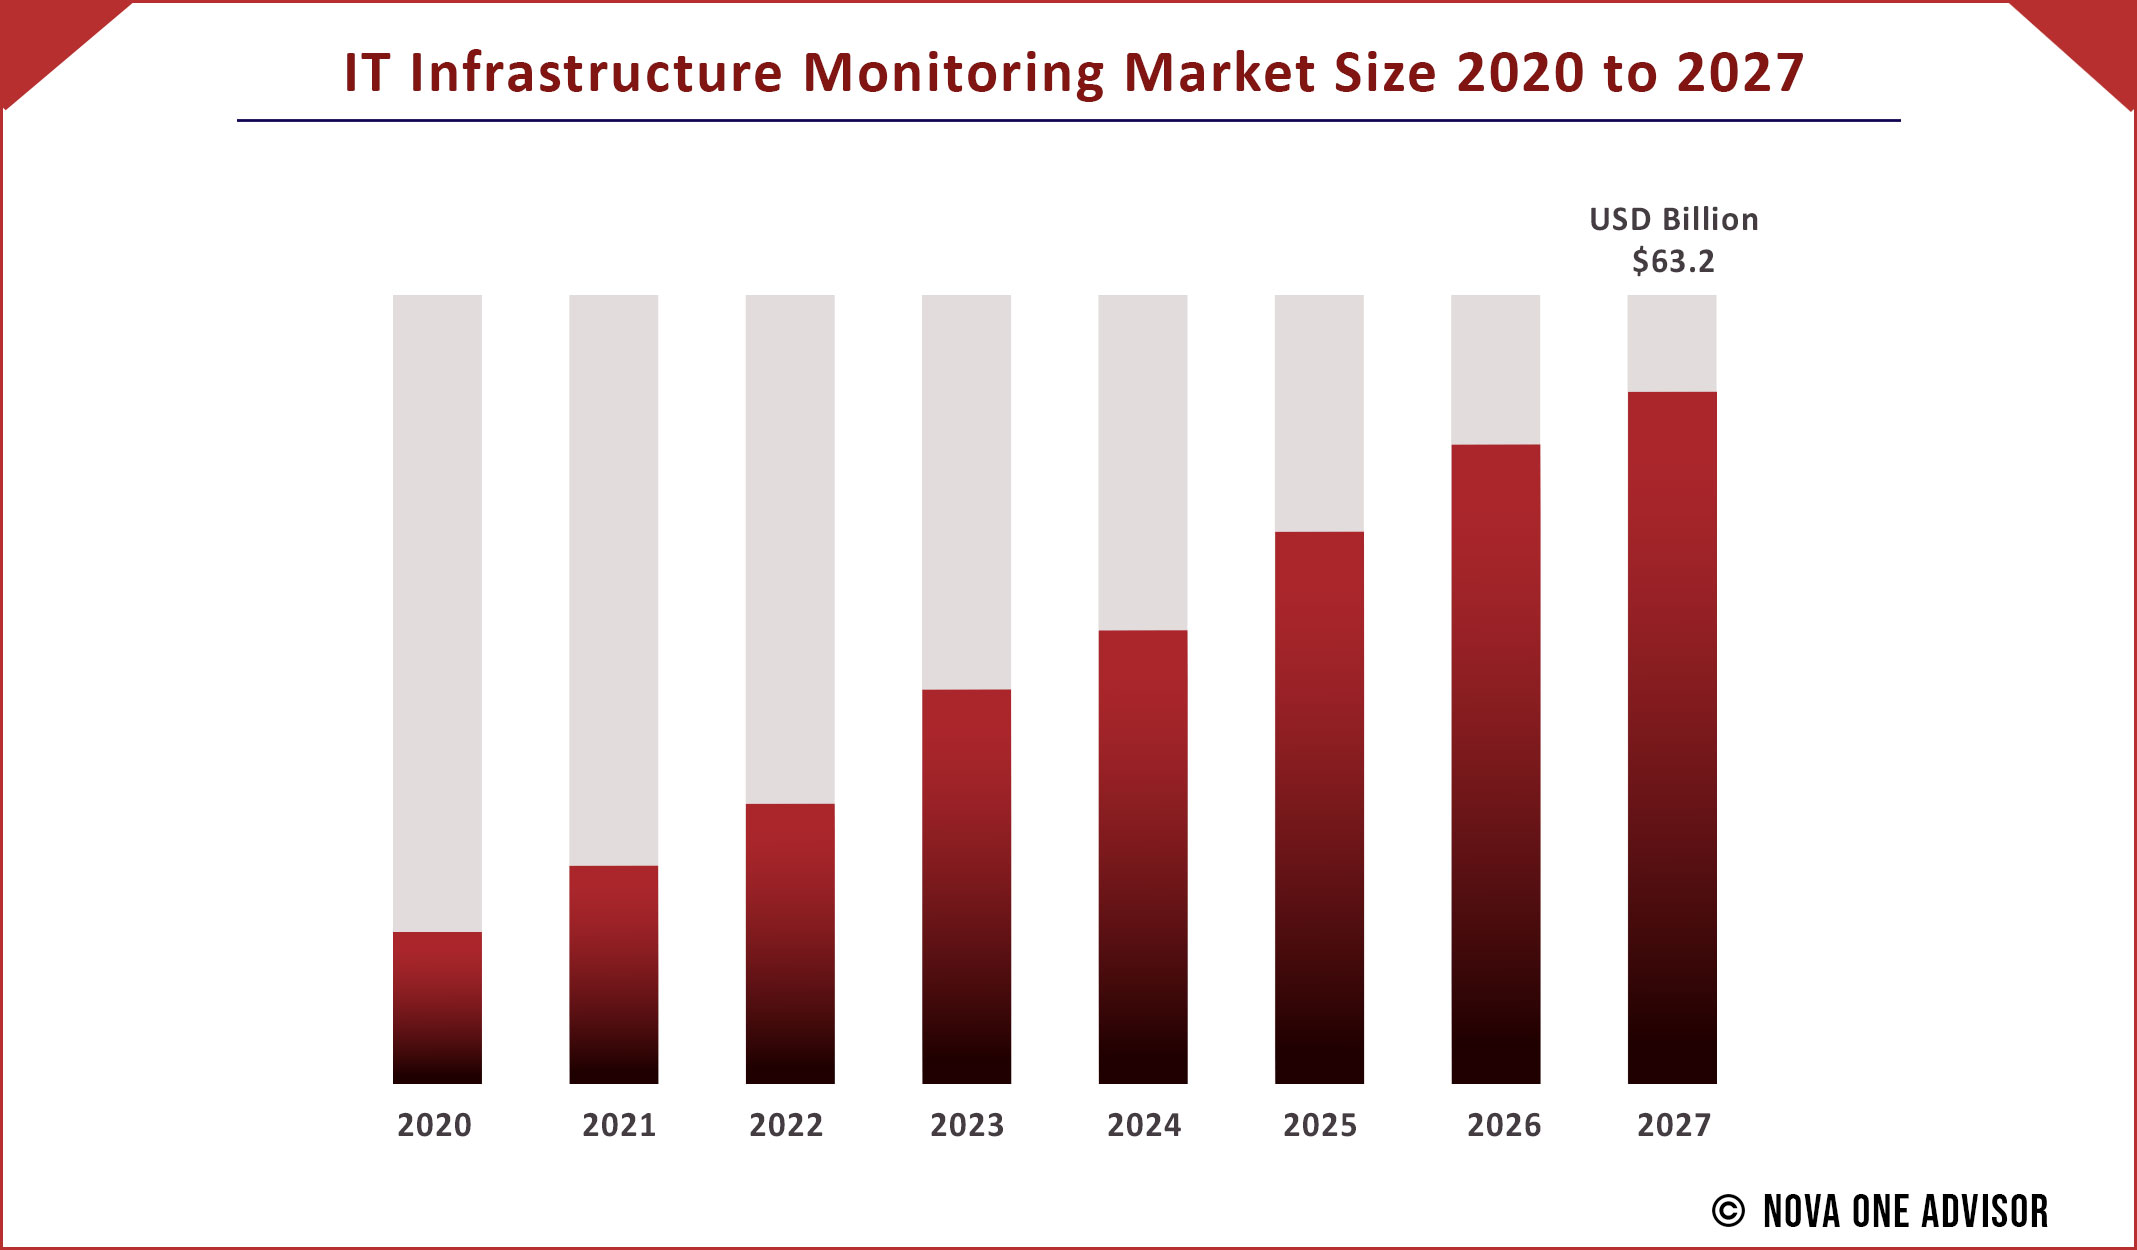 IT Infrastructure Monitoring Market Size 2020 to 2027